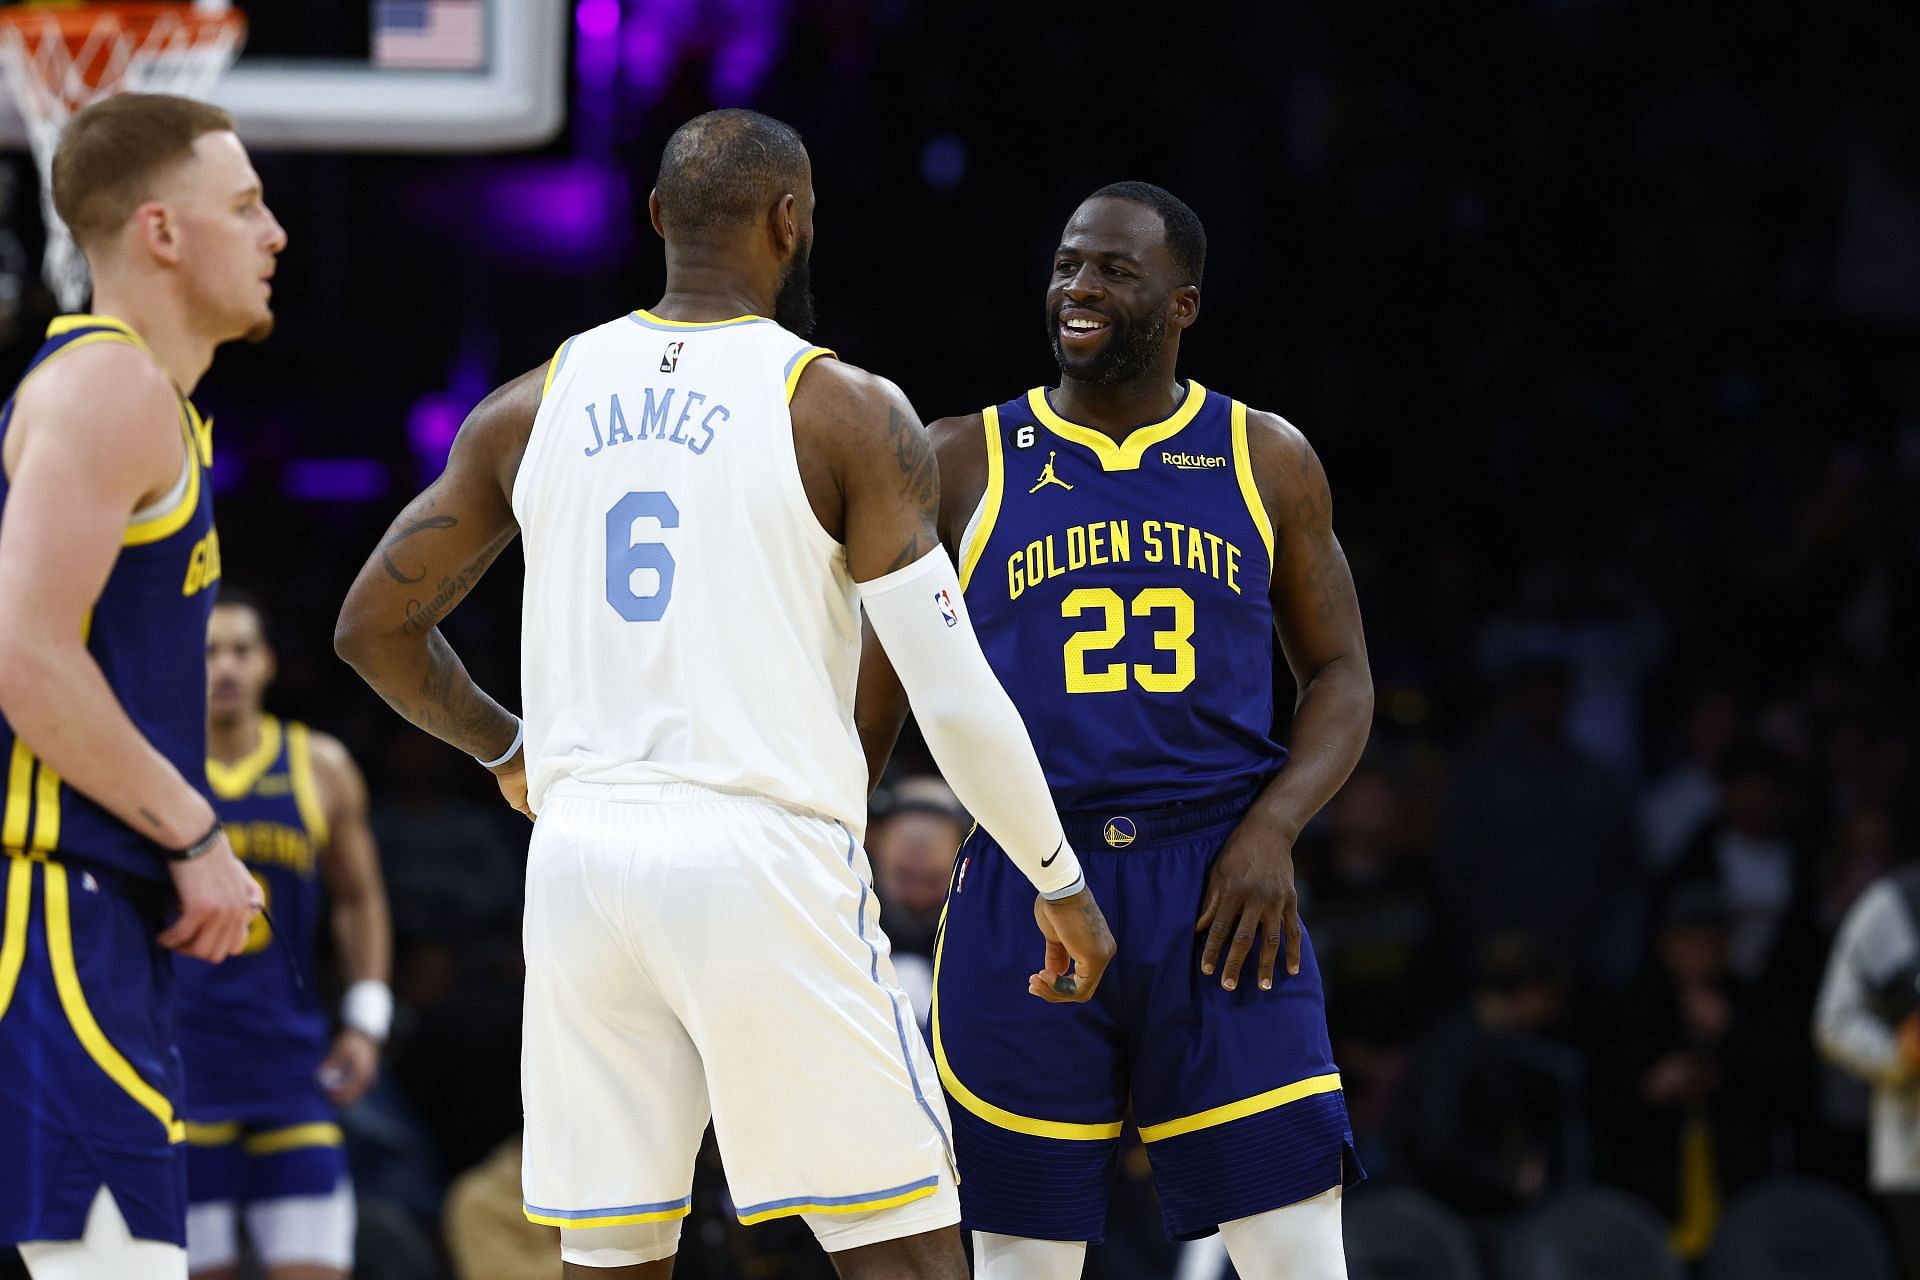 Golden State Warriors' Draymond Green, Los Angeles Lakers' LeBron James  share a rivalry and a friendship